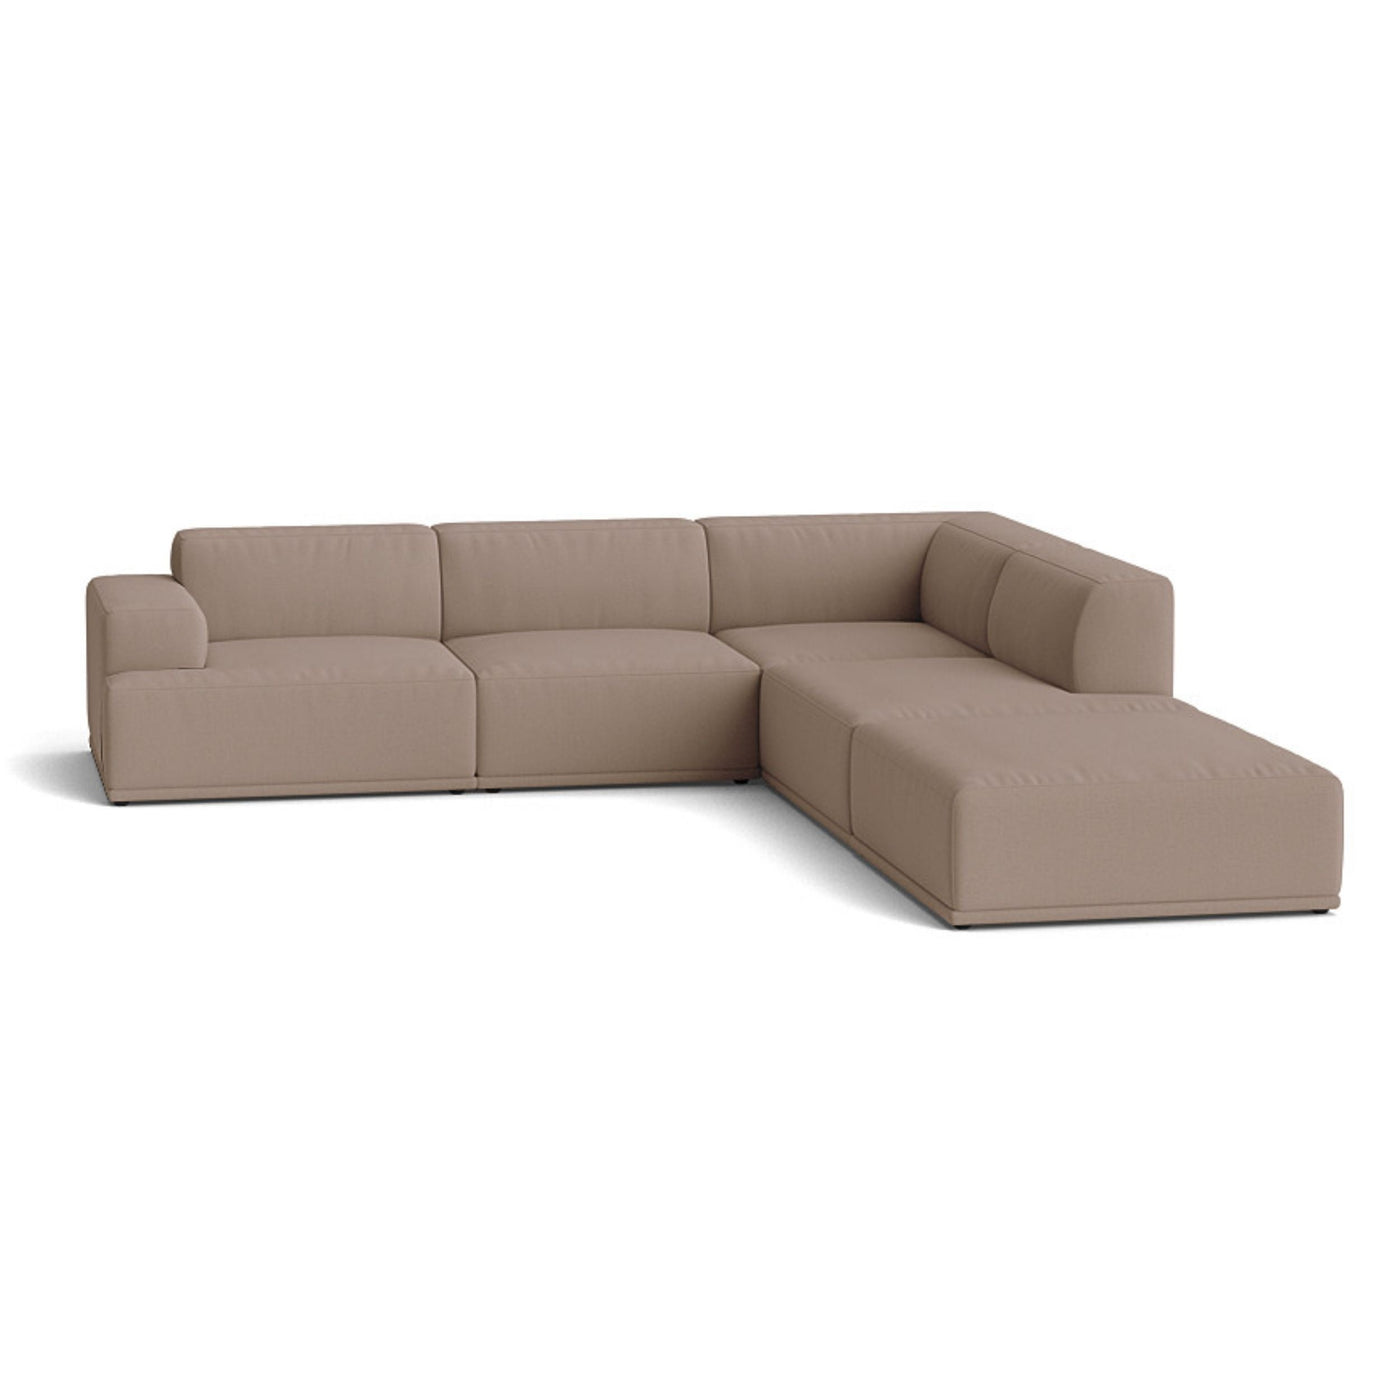 Muuto Connect Soft Modular Corner Sofa, configuration 2. Made-to-order from someday designs. #colour_steelcut-trio-426